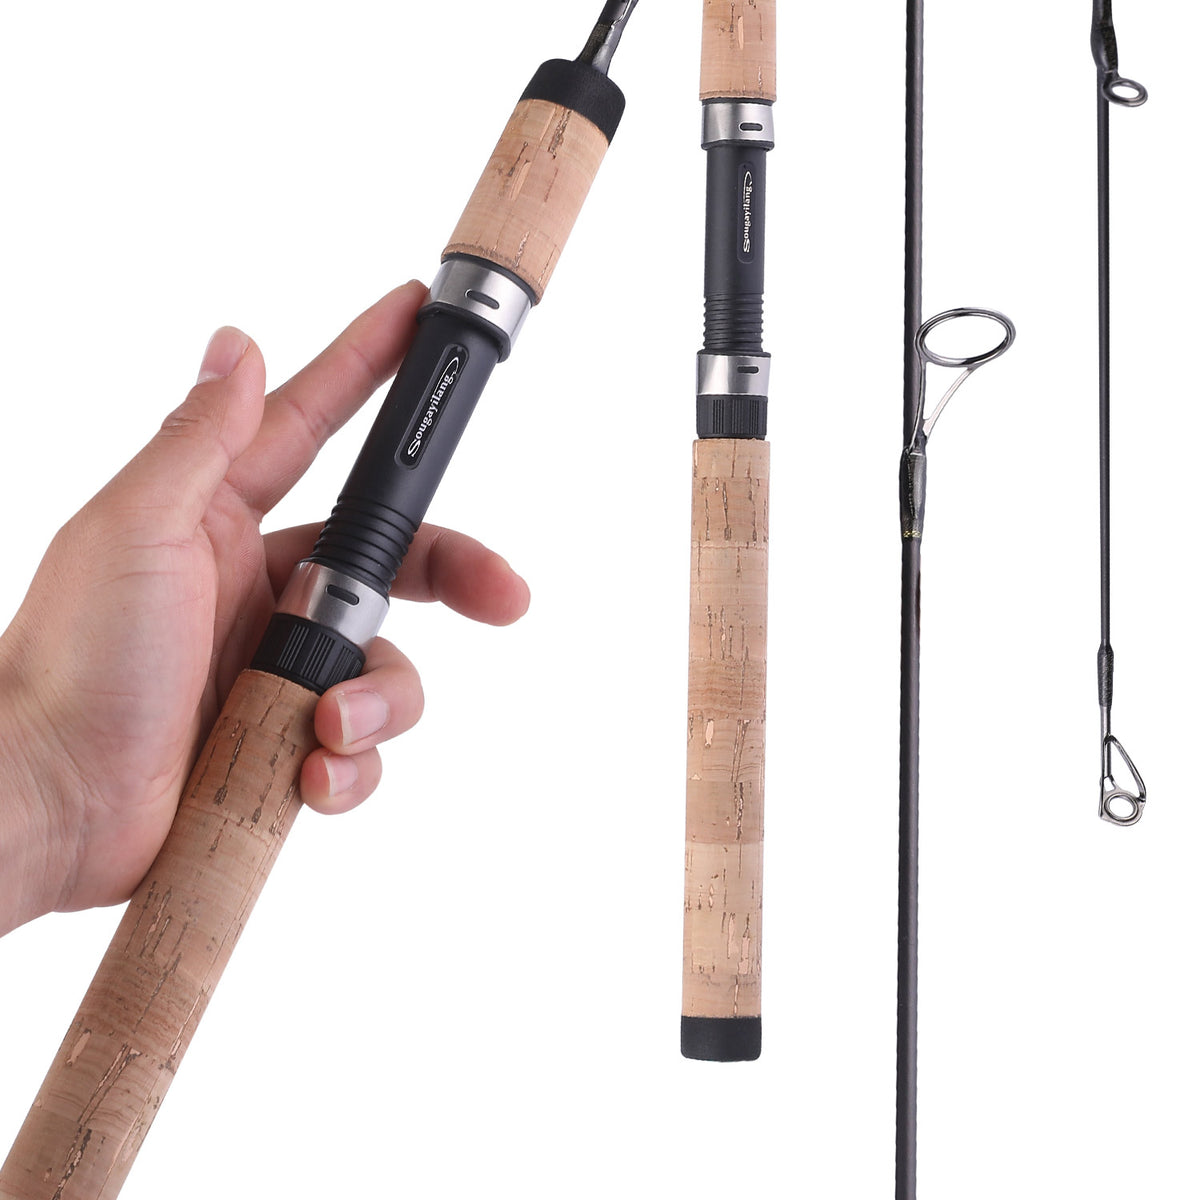 Sougayilang Resolute Fishing Rods, Spinning Rods & Casting Rods,  Ultra-Sensitive Carbon Fishing Rod Blanks,Oxide Ring Stainless Steel  Guides, Super Non-Slip Handle(Ultralight 1.8m/5.9ft Casting Rod), Spinning  Rods -  Canada